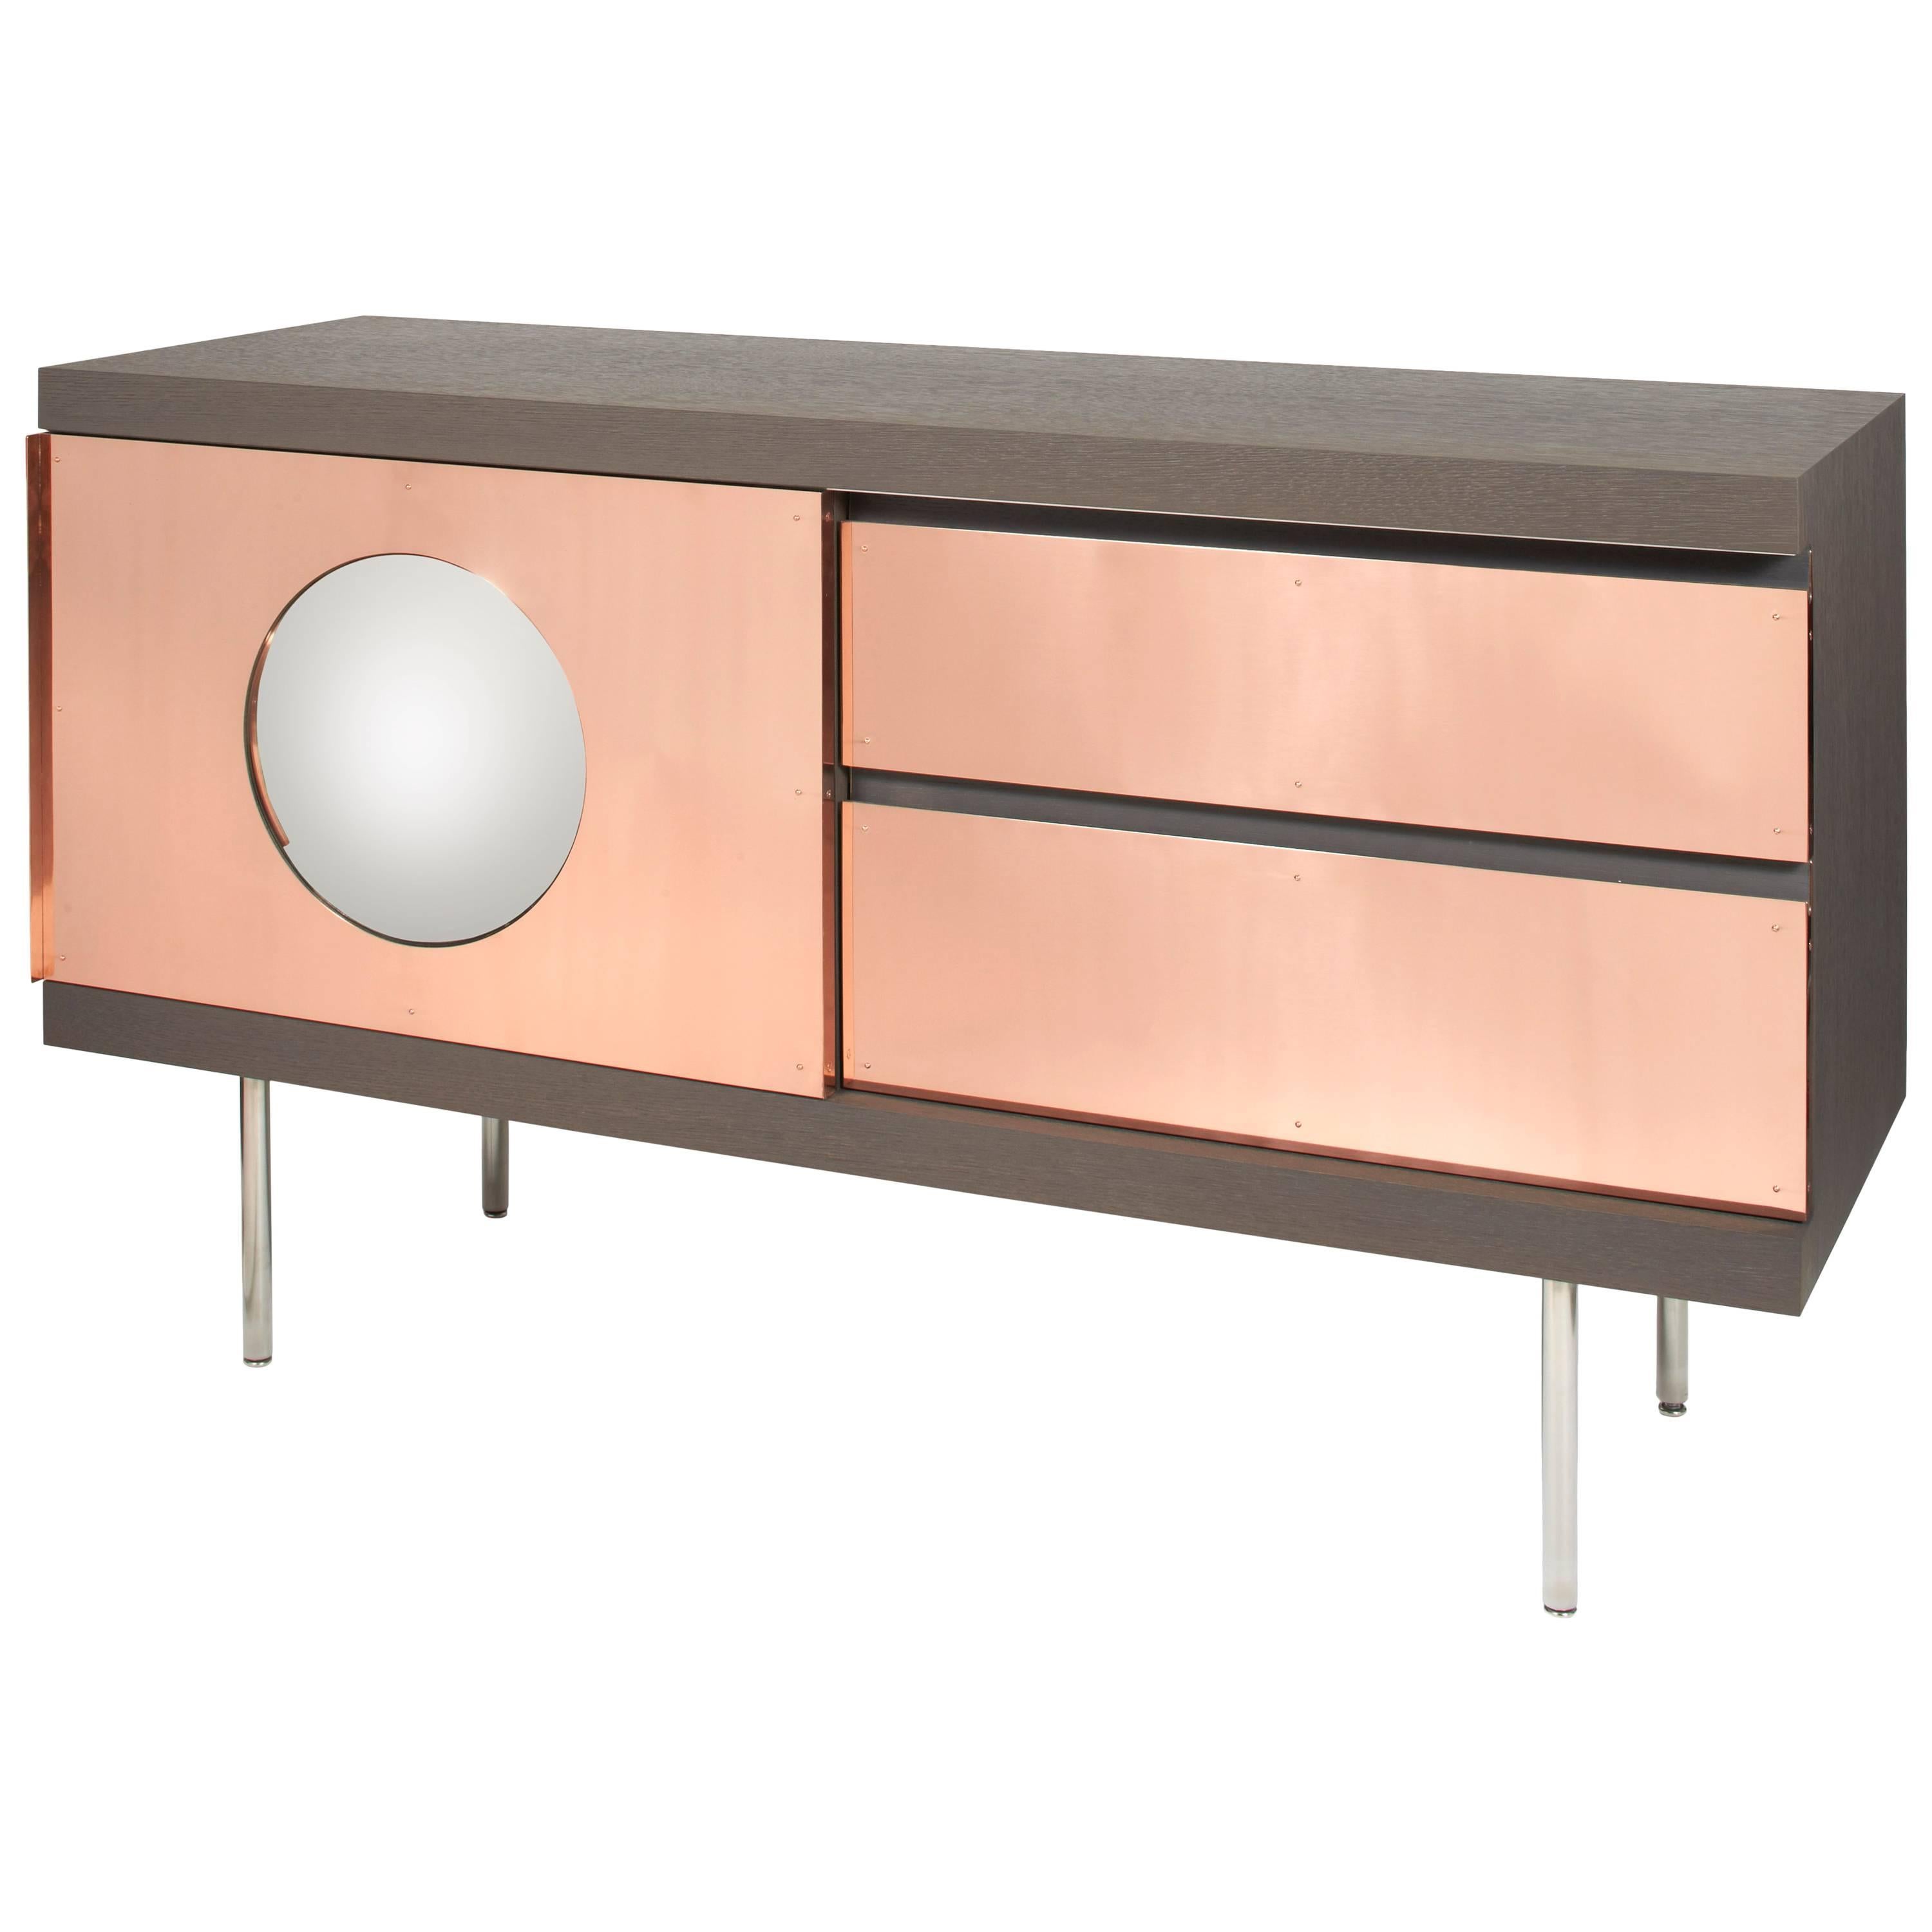 Alice. Sideboard; brushed stained oak. Copper. Convex mirror. Patrick Naggar.